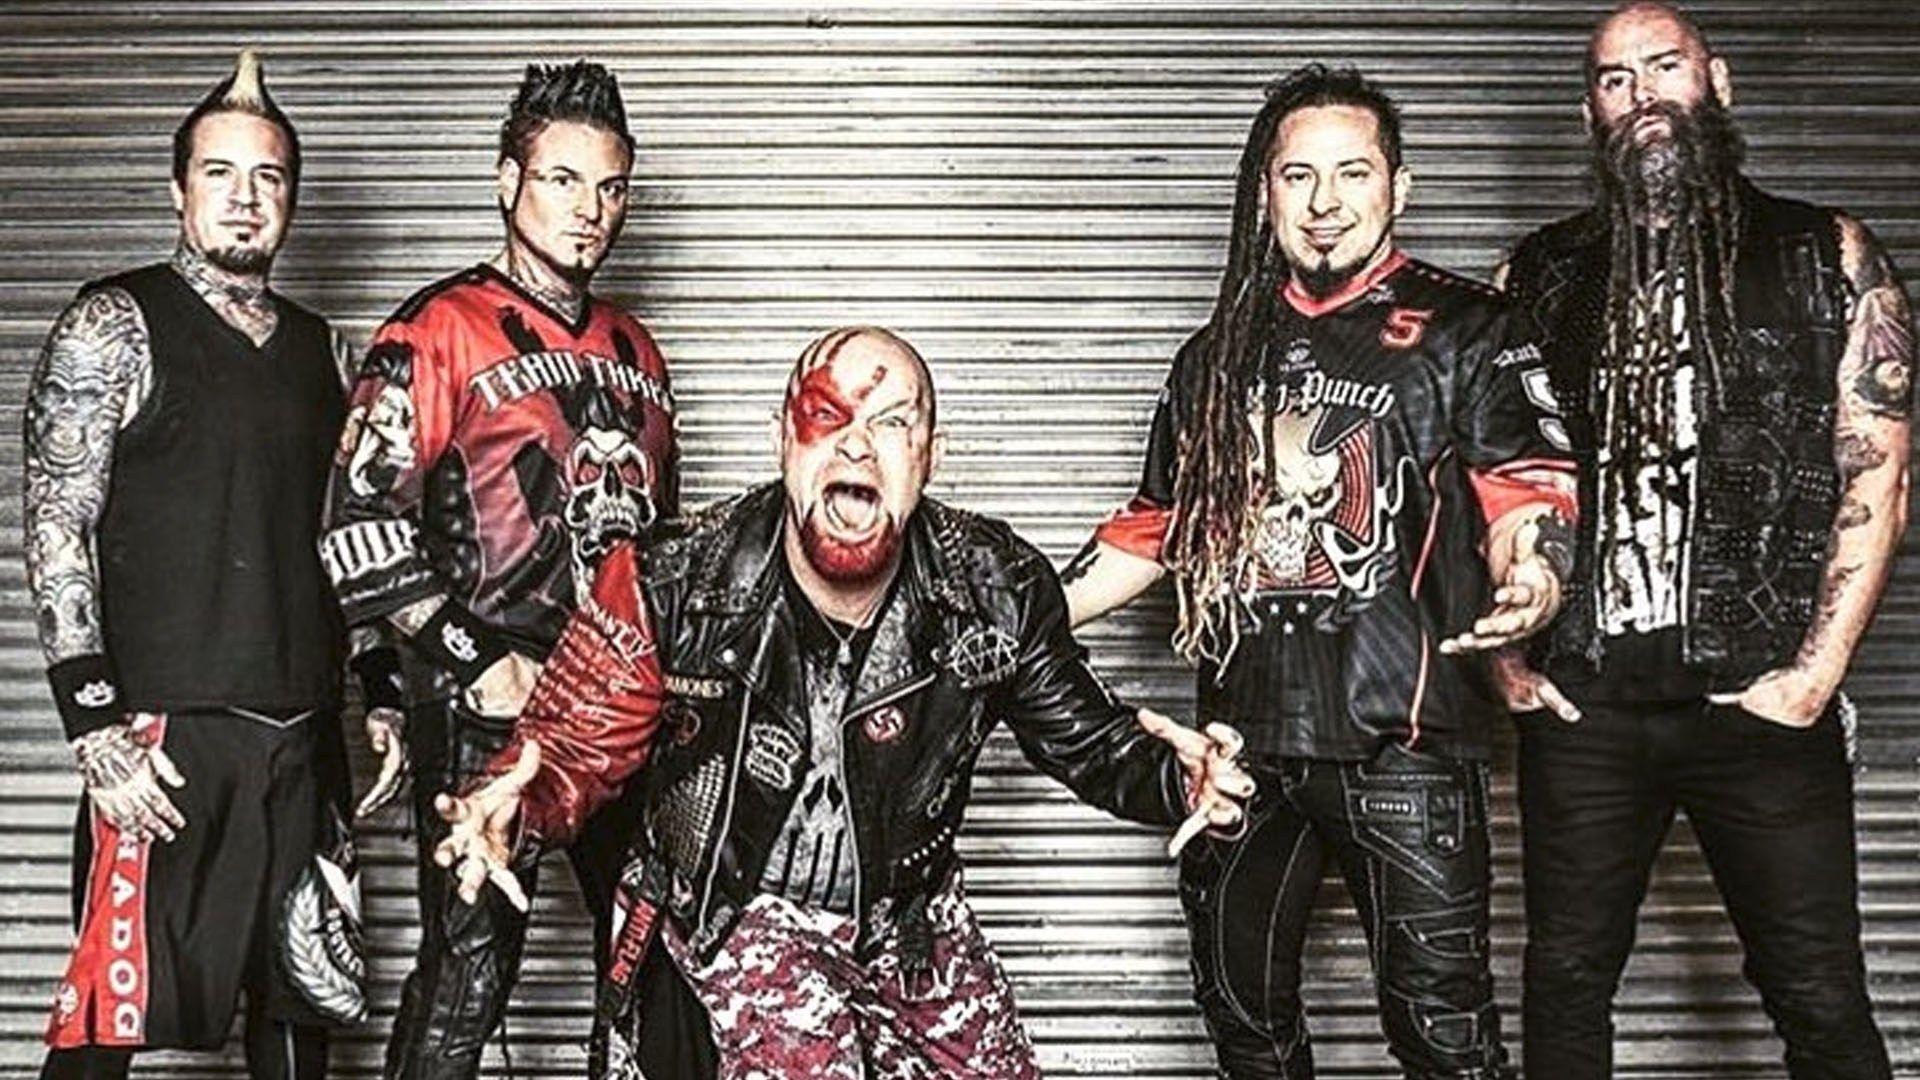 A Decade Of Destruction: Five Finger Death Punch Are Back For Real